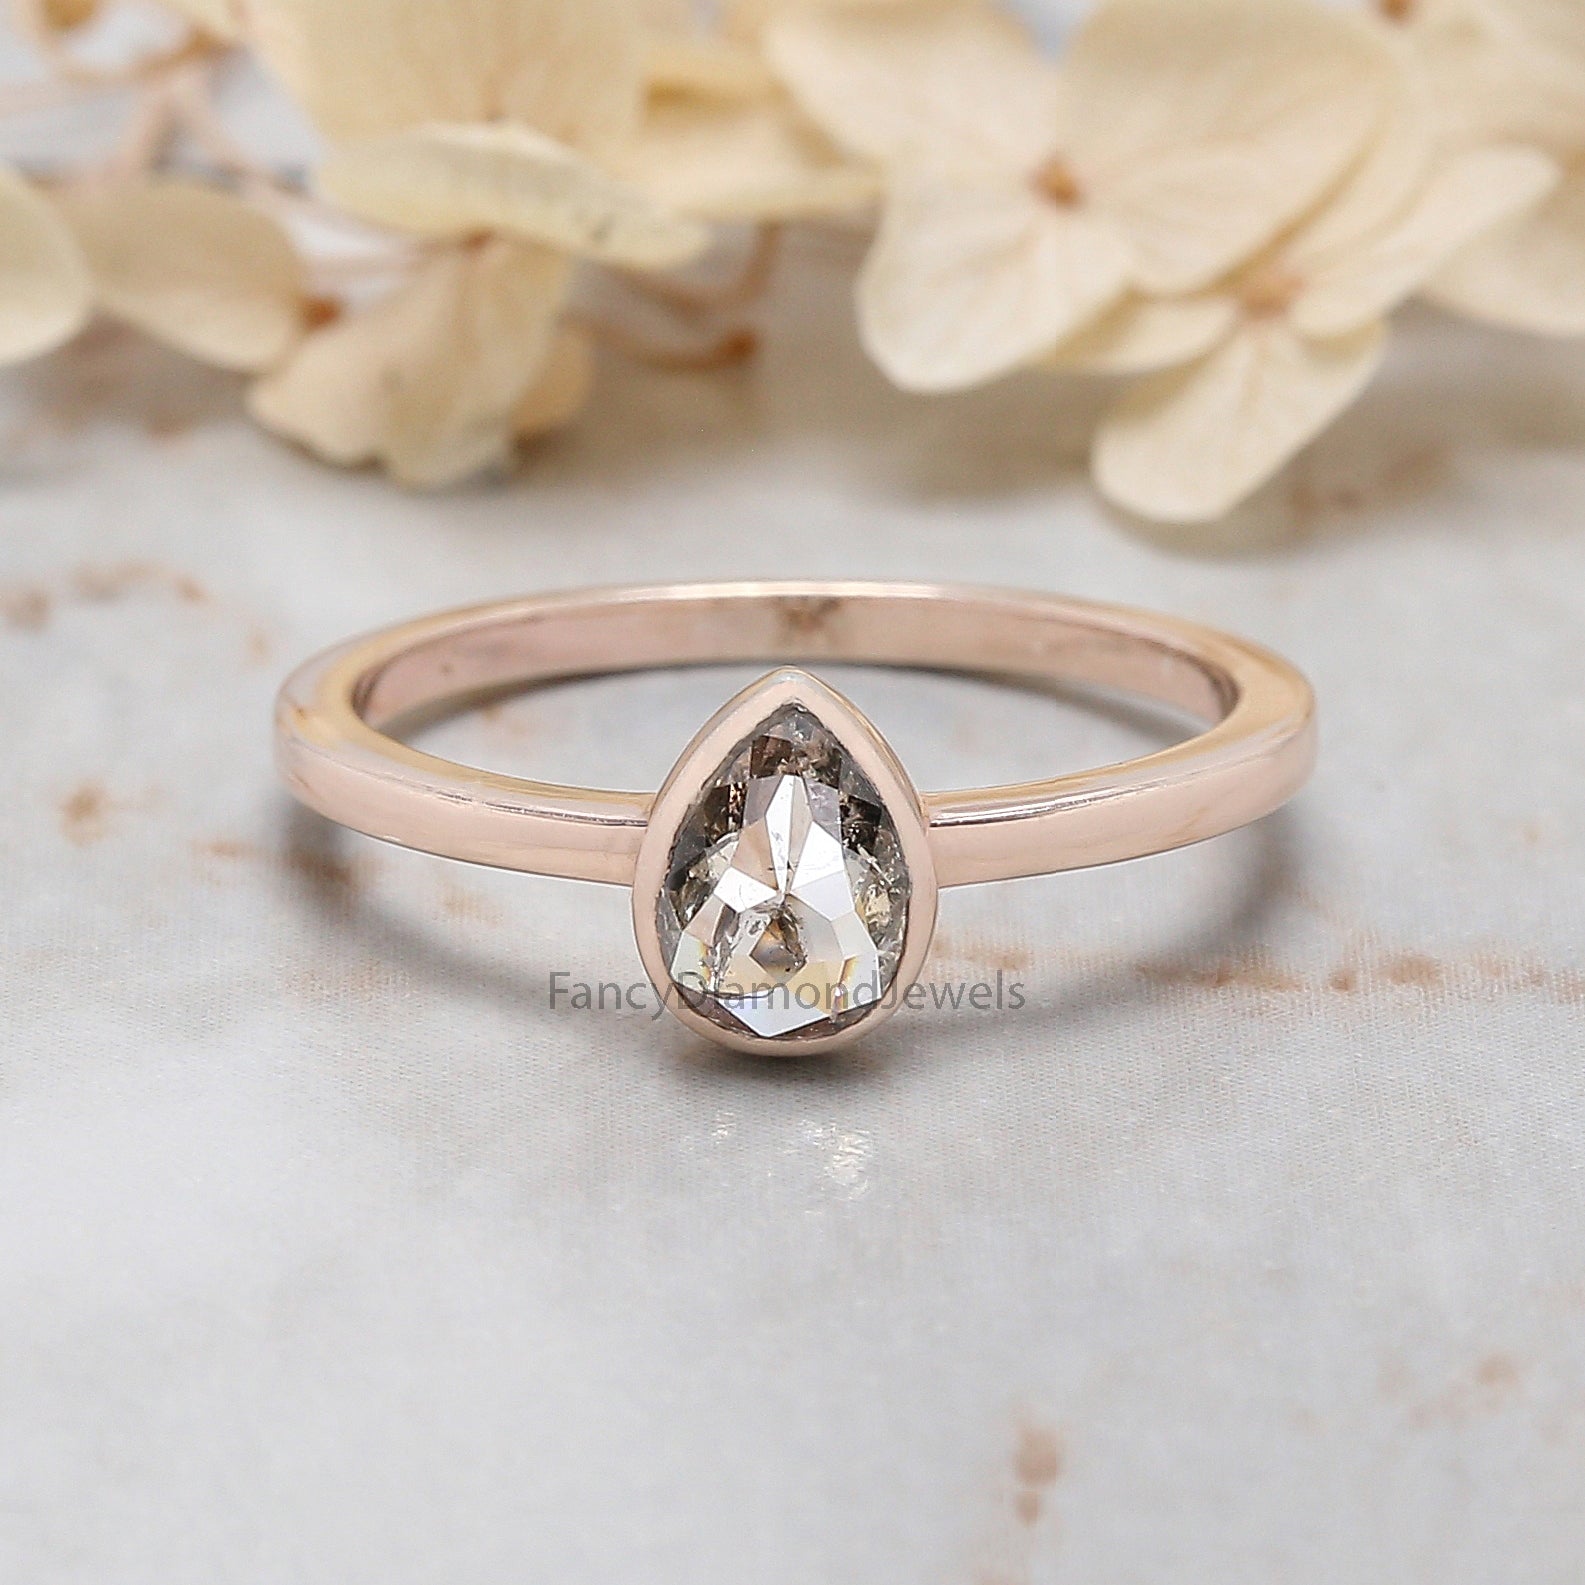 0.41 Ct Natural Pear Cut Salt And Pepper Diamond Ring 5.95 MM Pear Shape Diamond Ring 14K Solid Rose Gold Silver Engagement Ring QN137